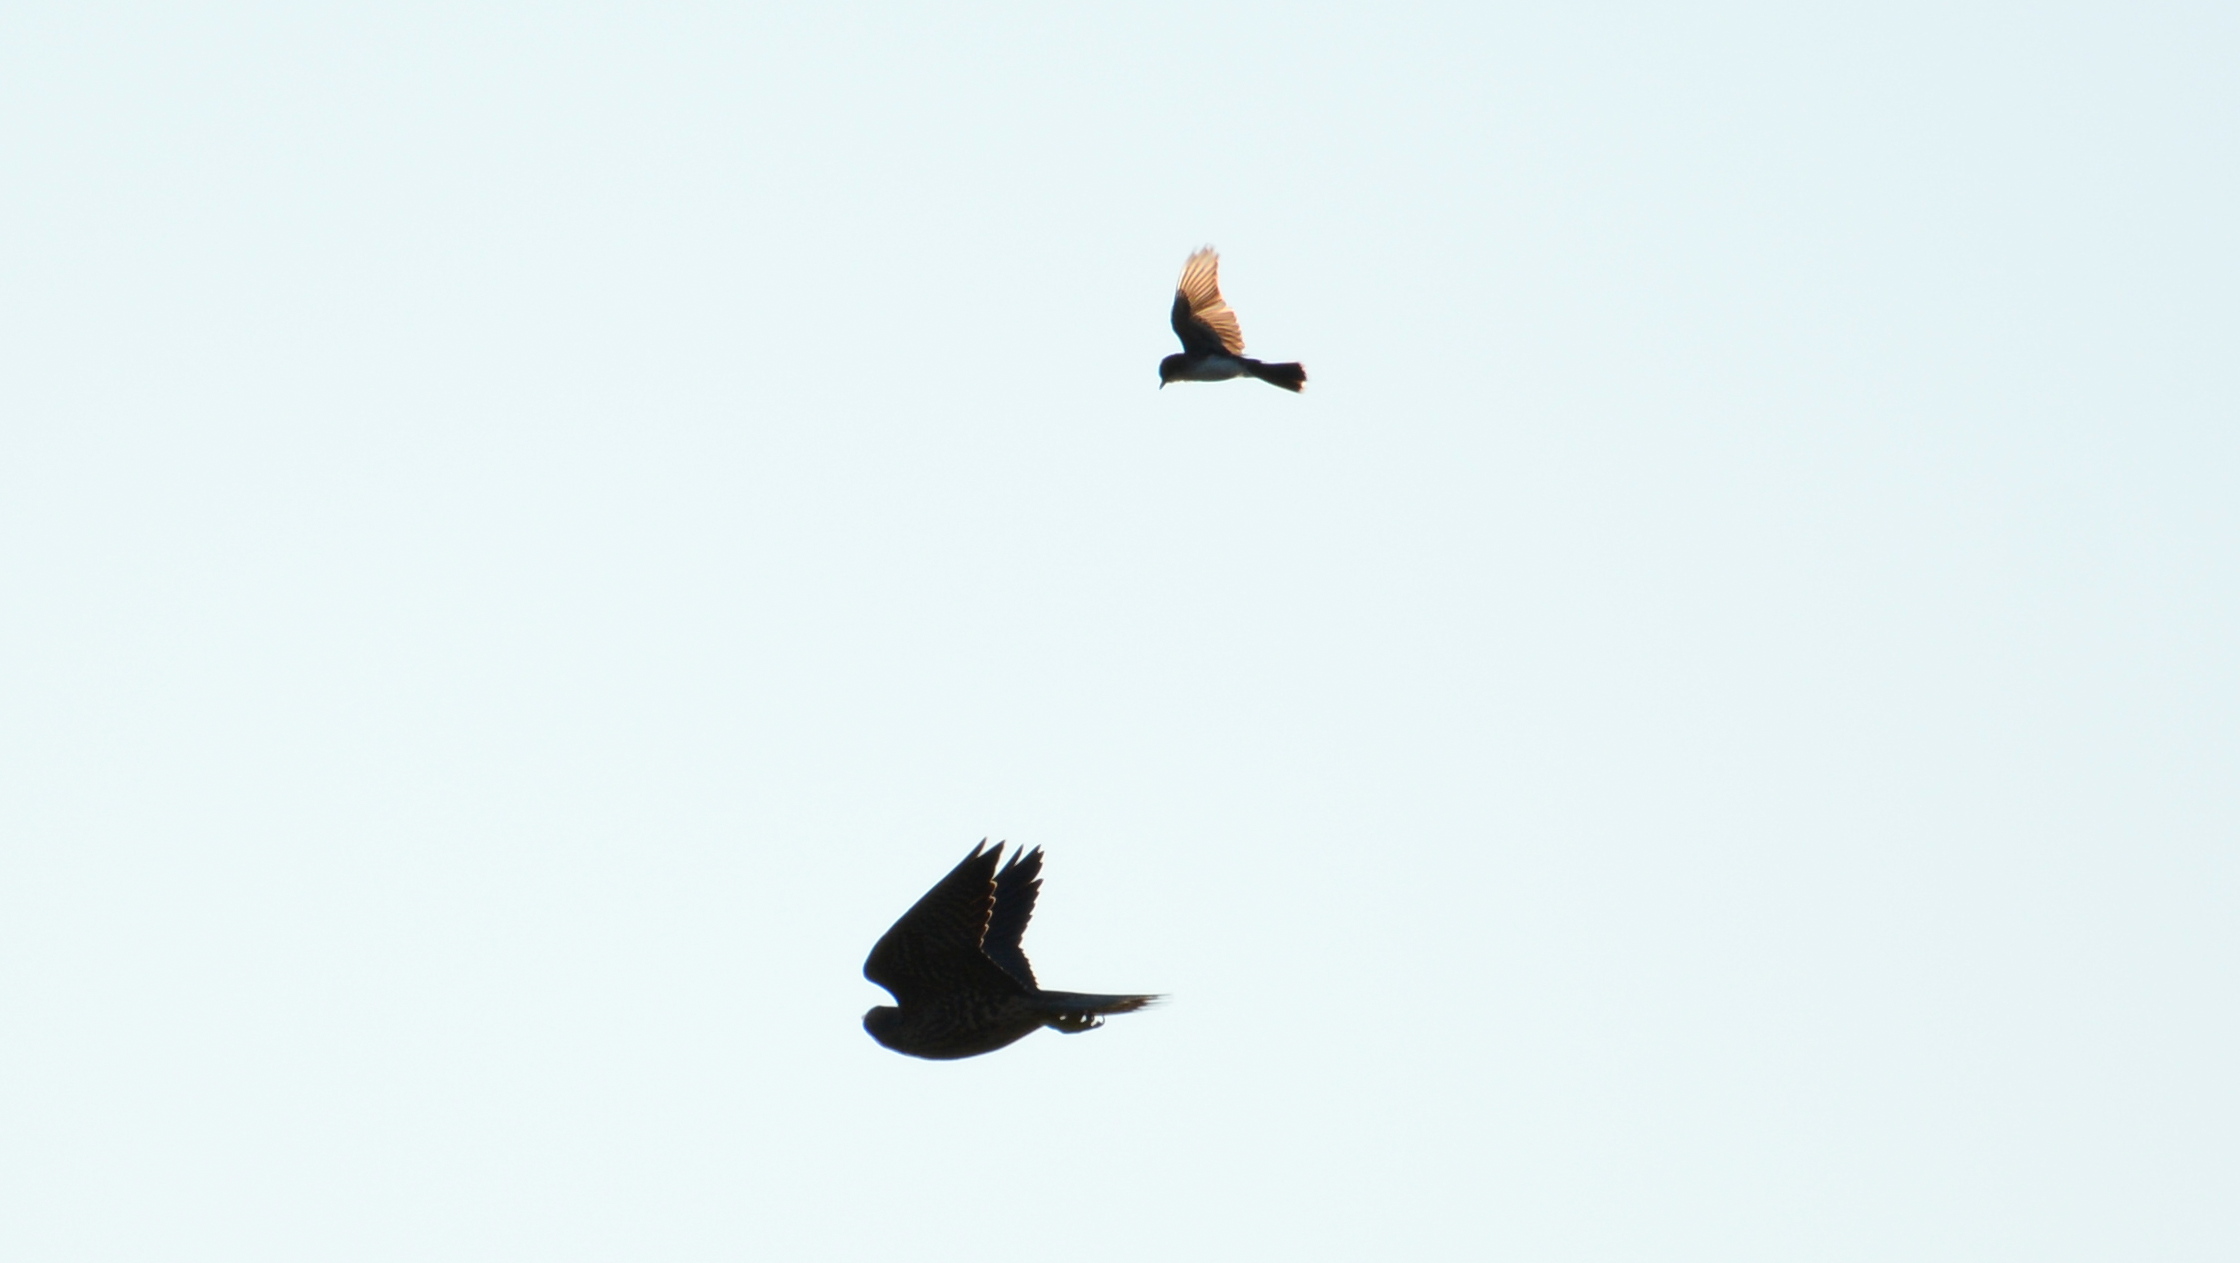 An Eastern Kingbird chases after one of the falcons